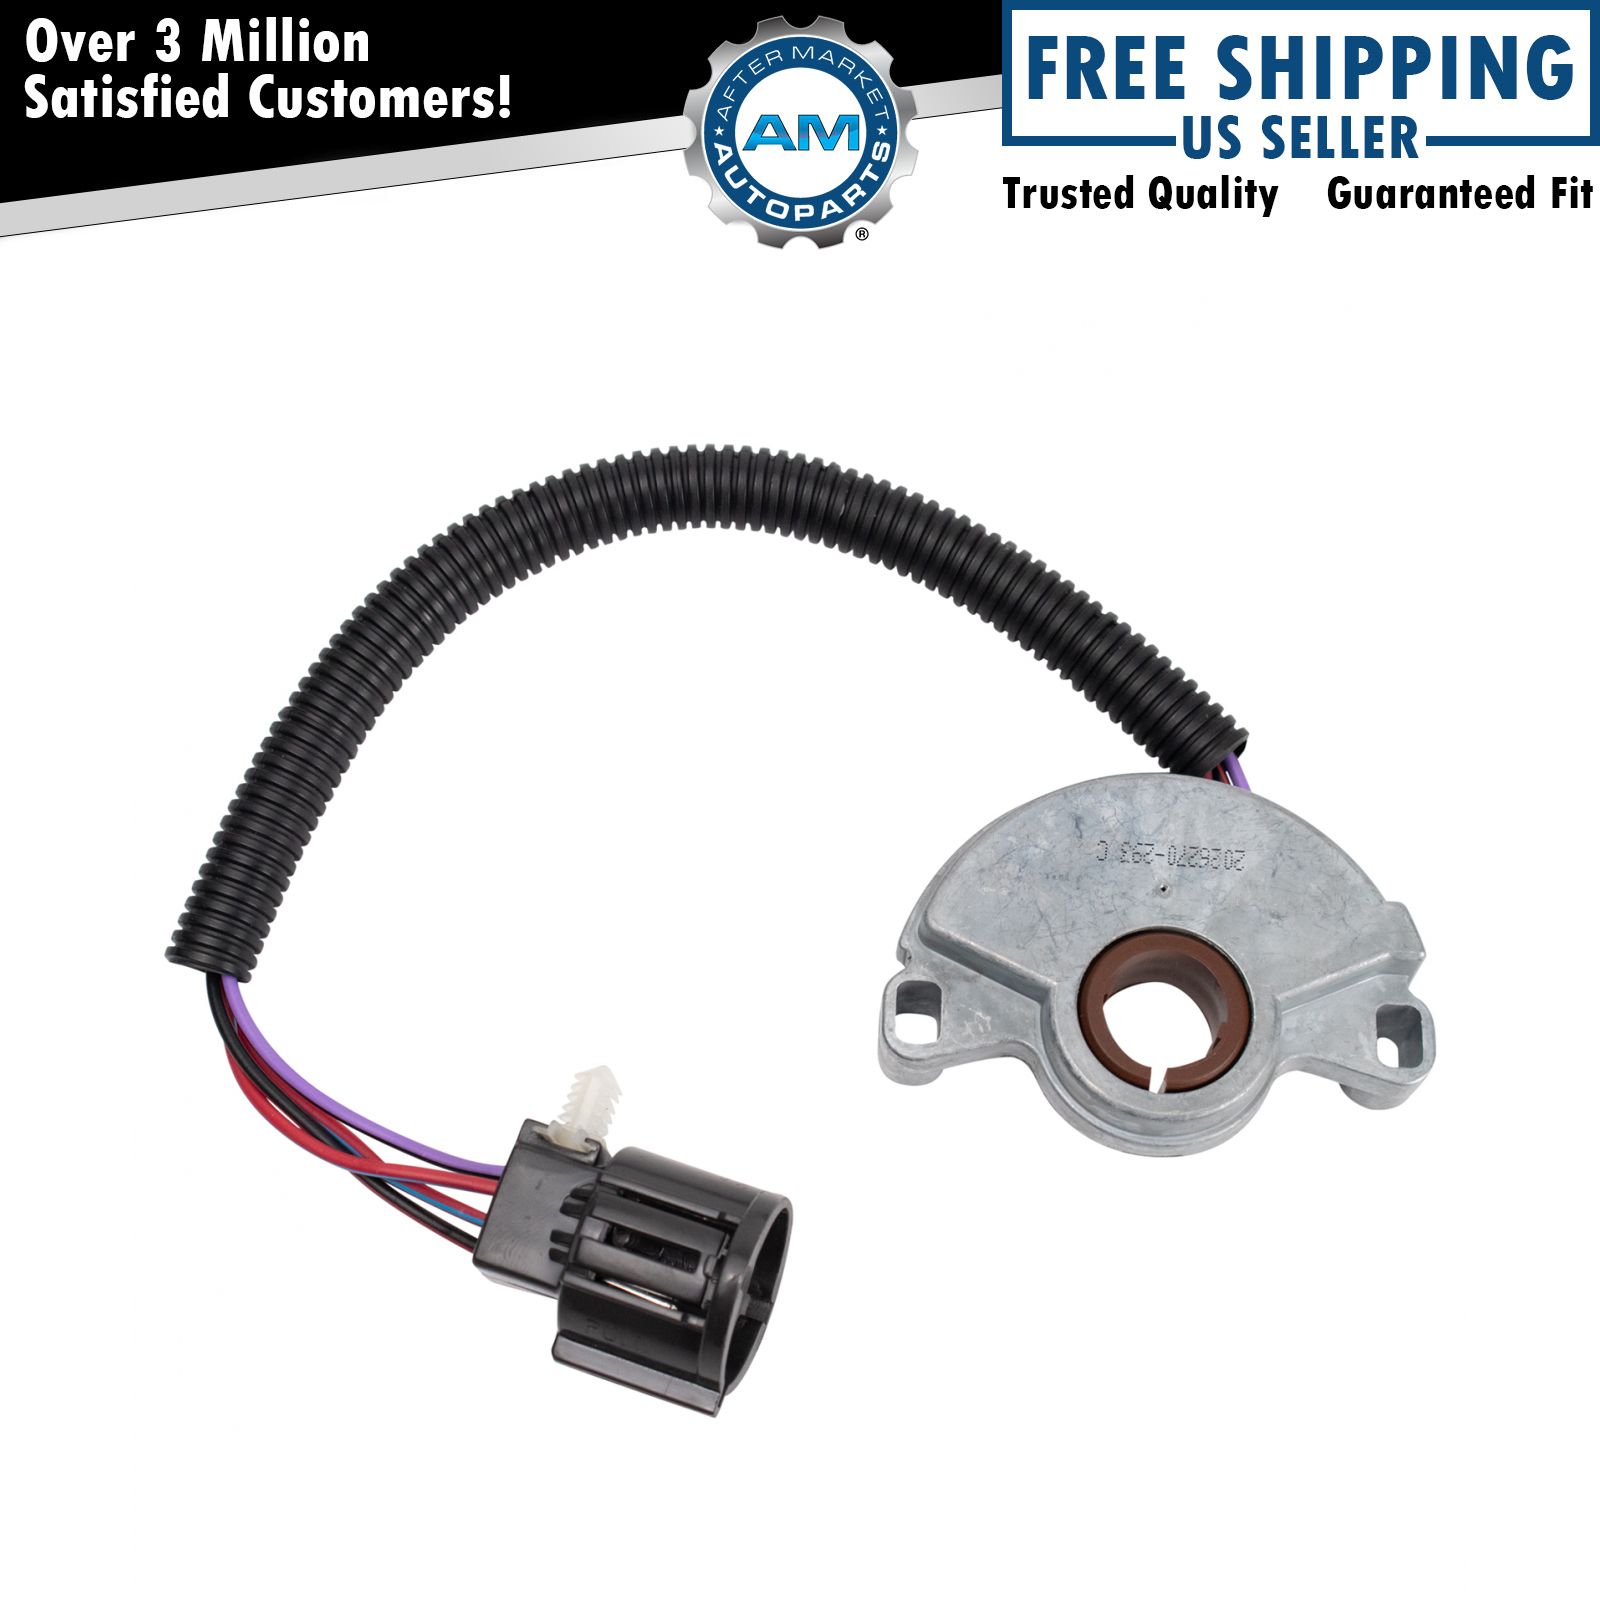 Neutral Safety Switch for Ford Mustang Ranger Mercury Cougar Capri Marquis